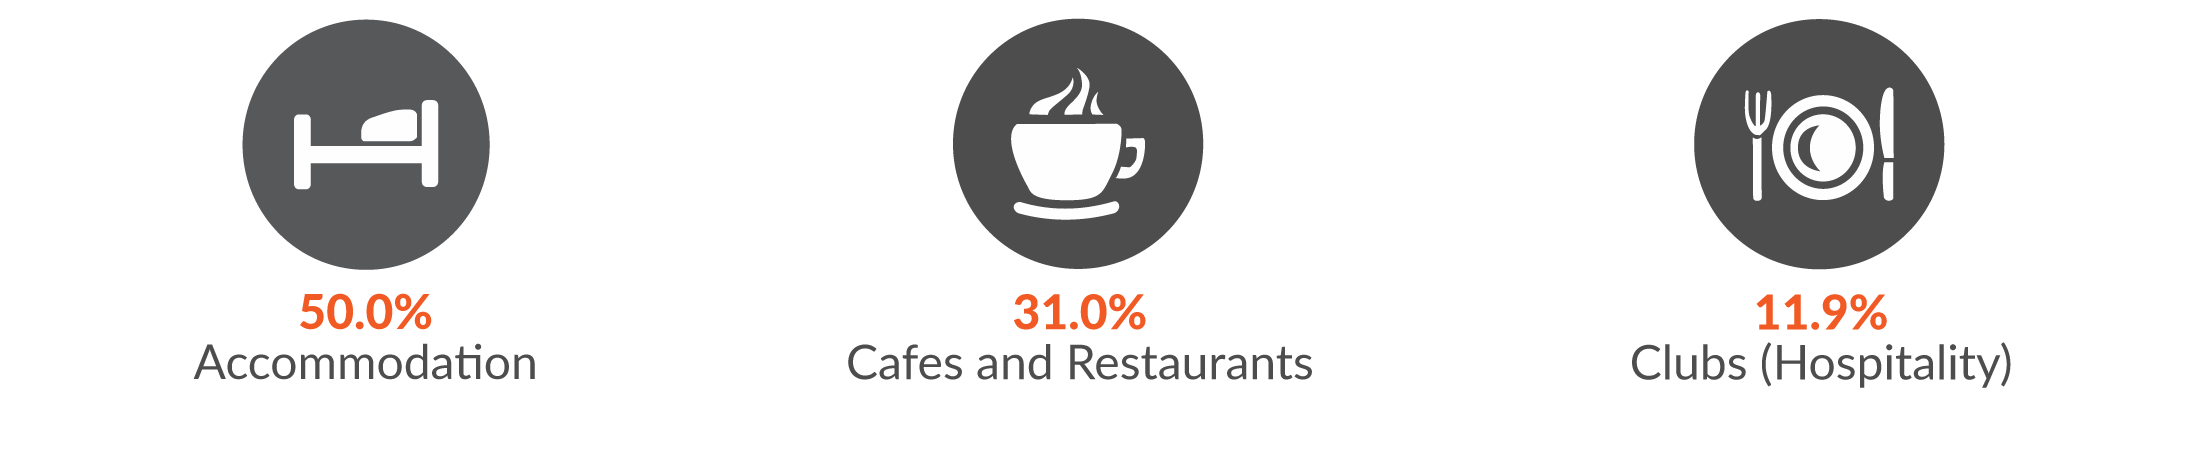 This infographic shows 50% of Accommodation, Cafes and Restaurants serious injury claims were from accommodation; 31% from Cafes and Restaurants; and 11.9% from clubs (hospitality).